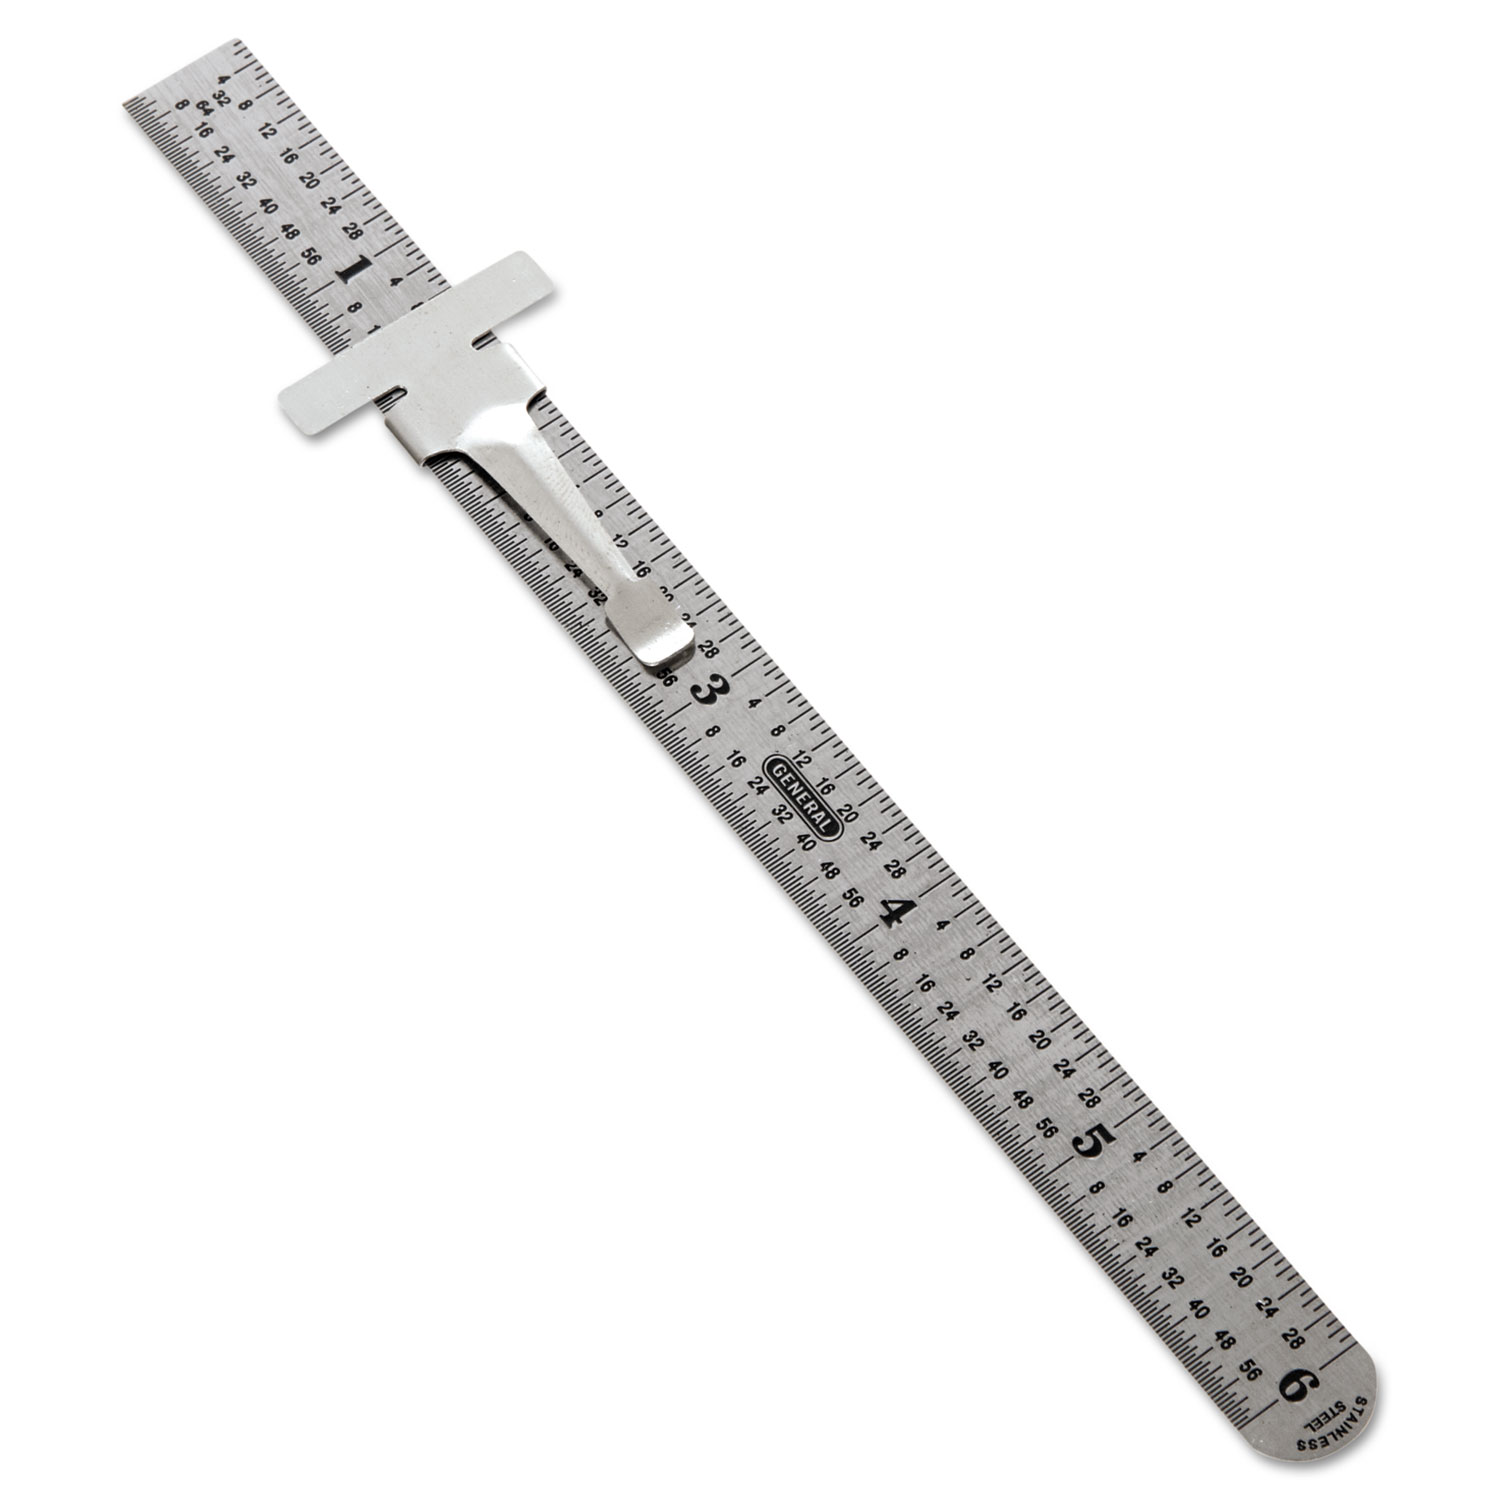 Precision Stainless Steel Ruler By General® Gti3001